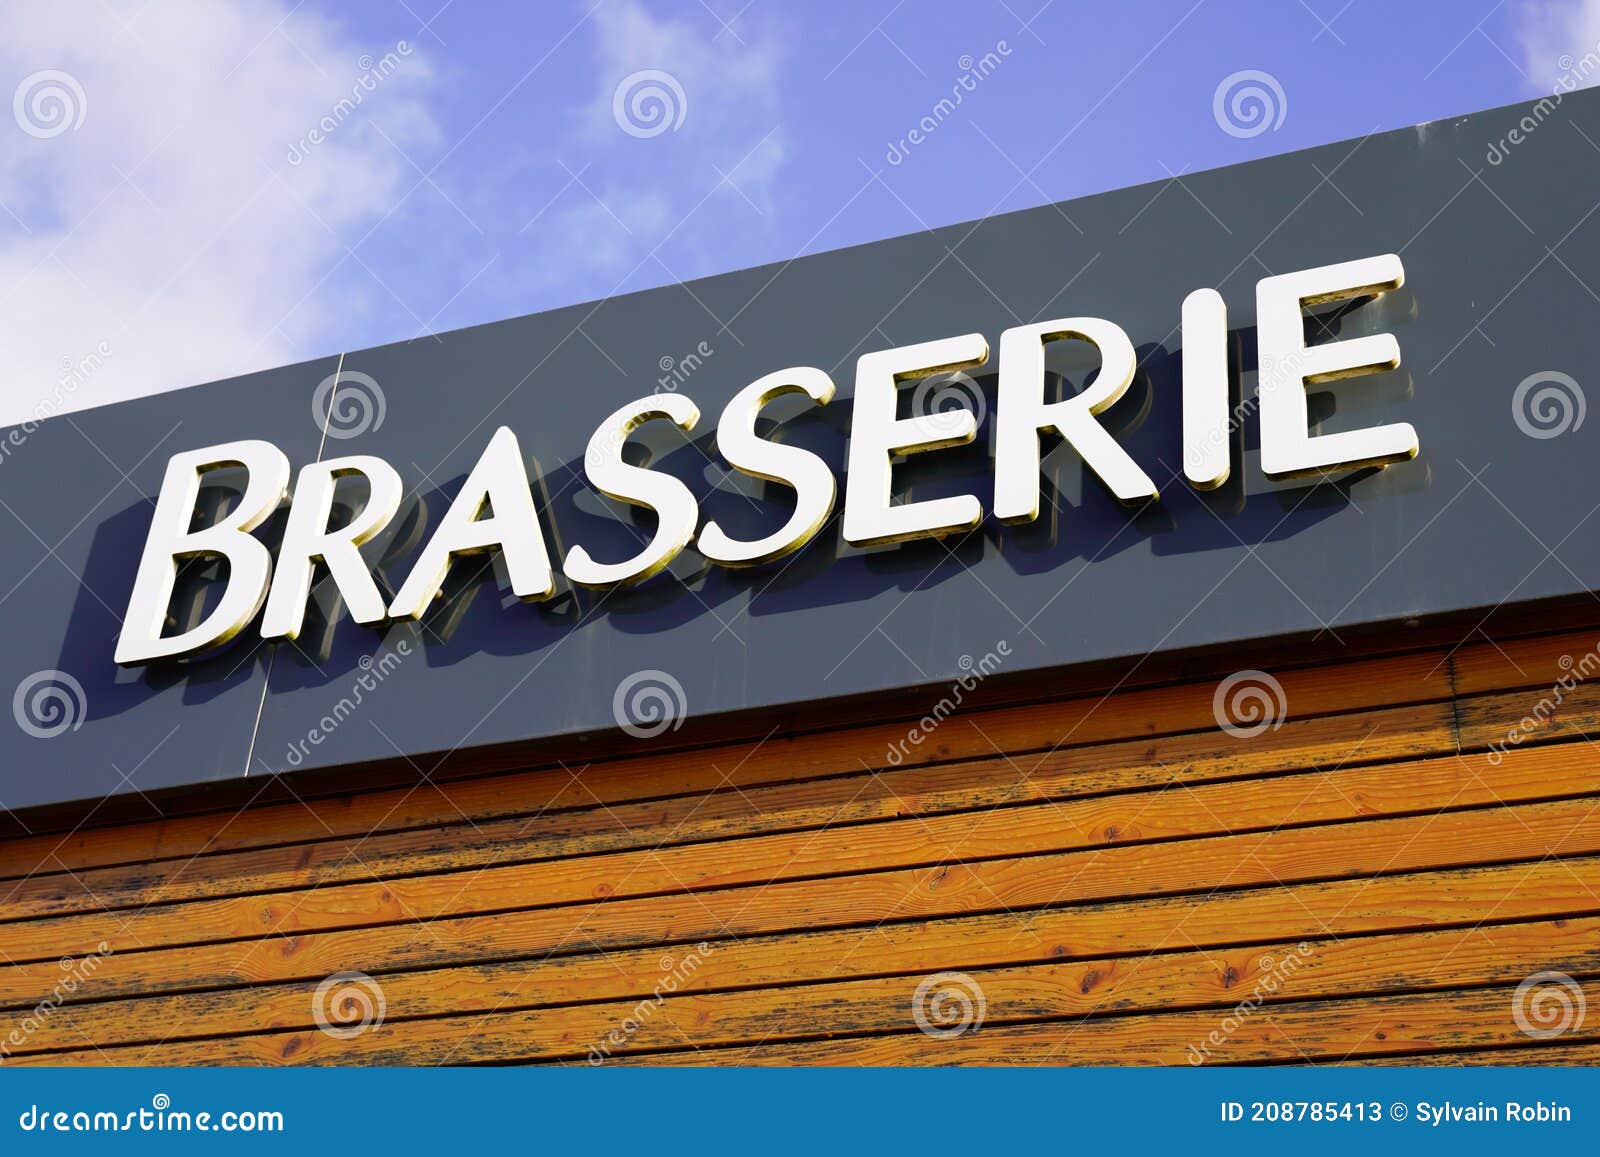 brasserie means beer bar sign text on pub a city street storefront building